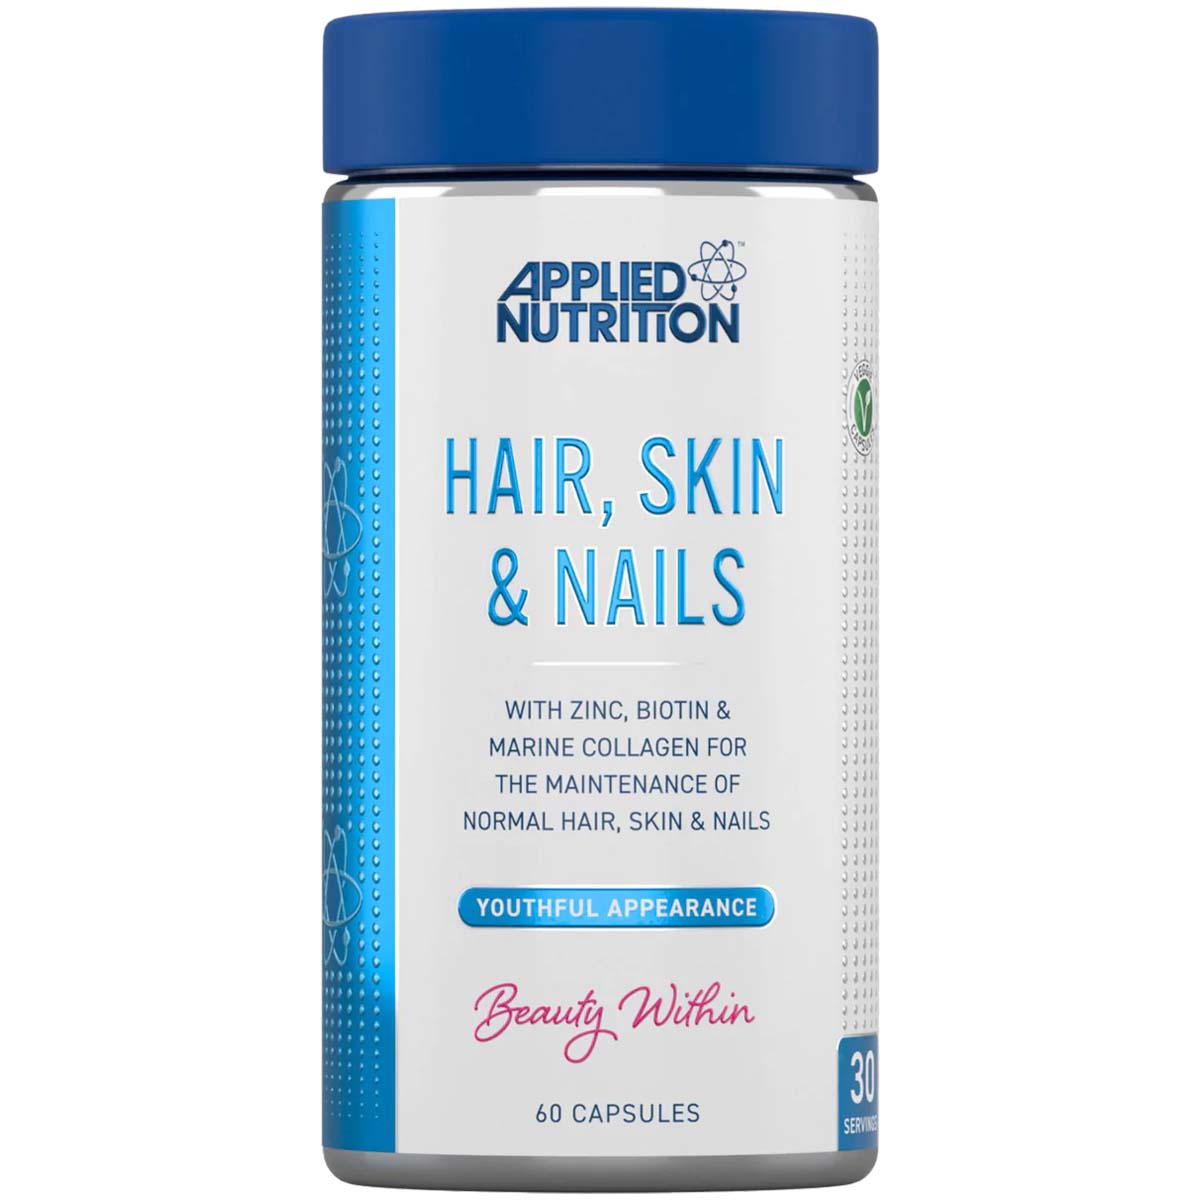 Applied Nutrition Hair, Skin & Nails, 60 Capsules